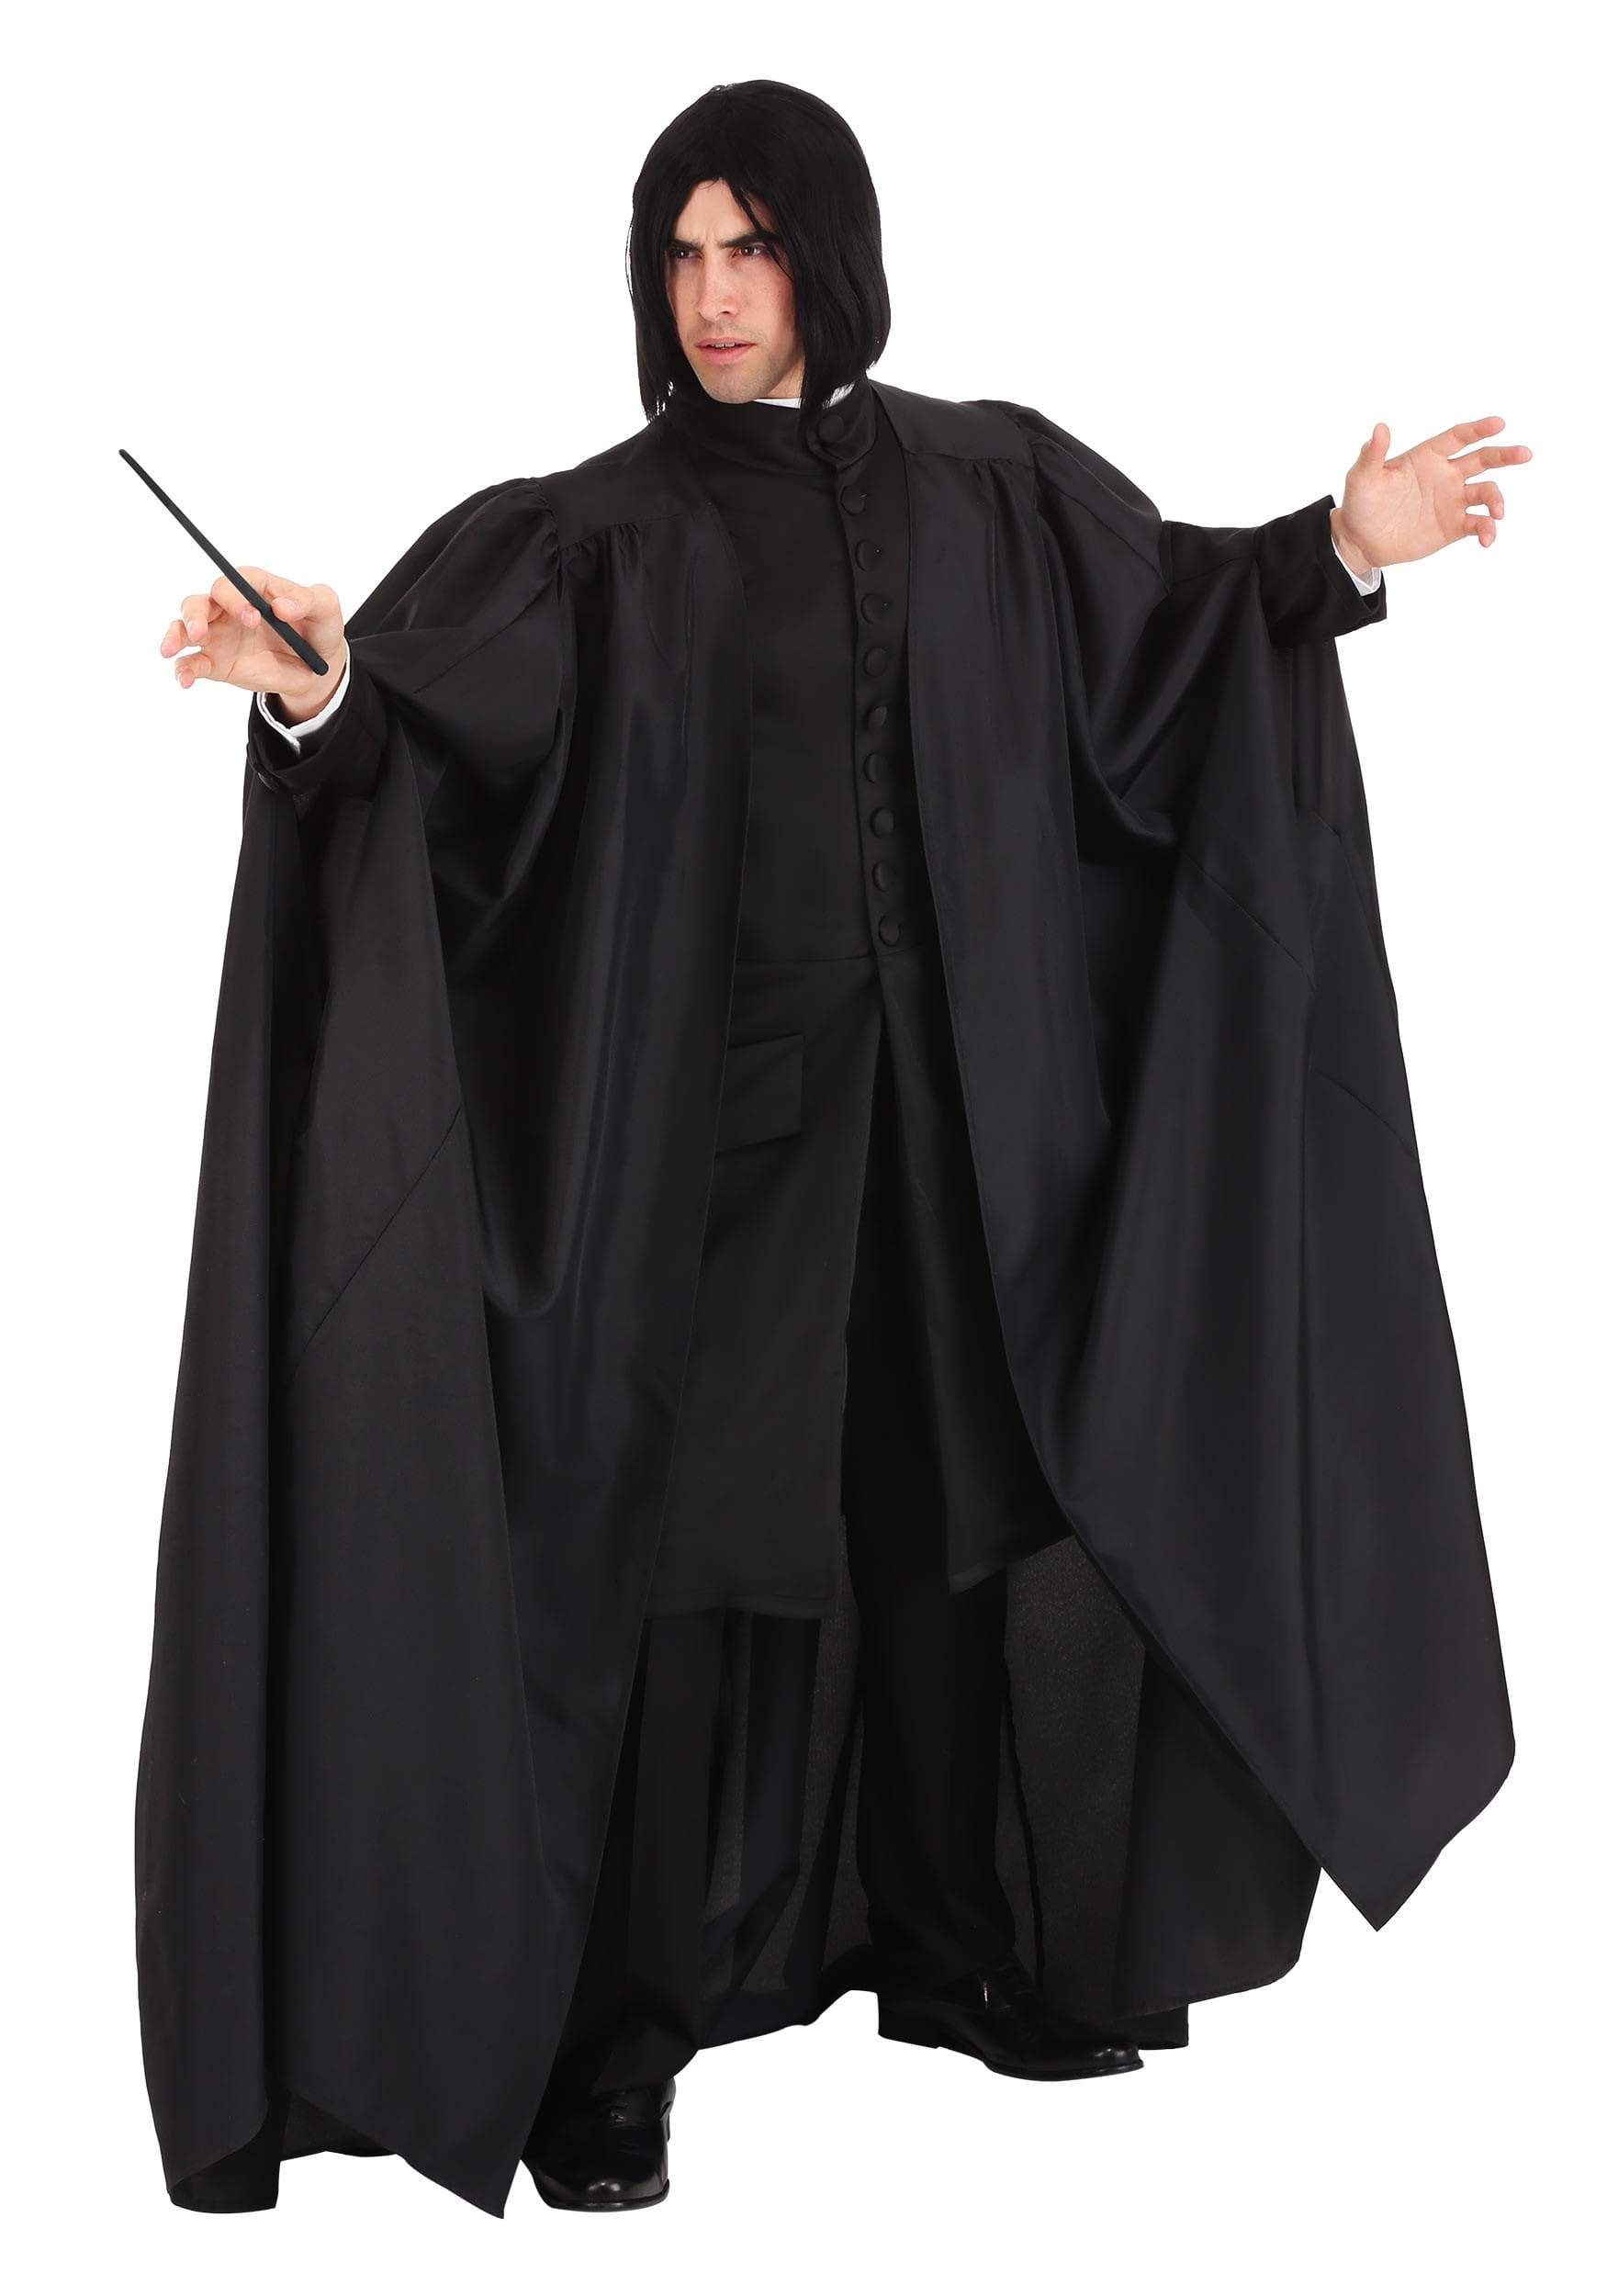 Slytherin Robe Deluxe - Disguise